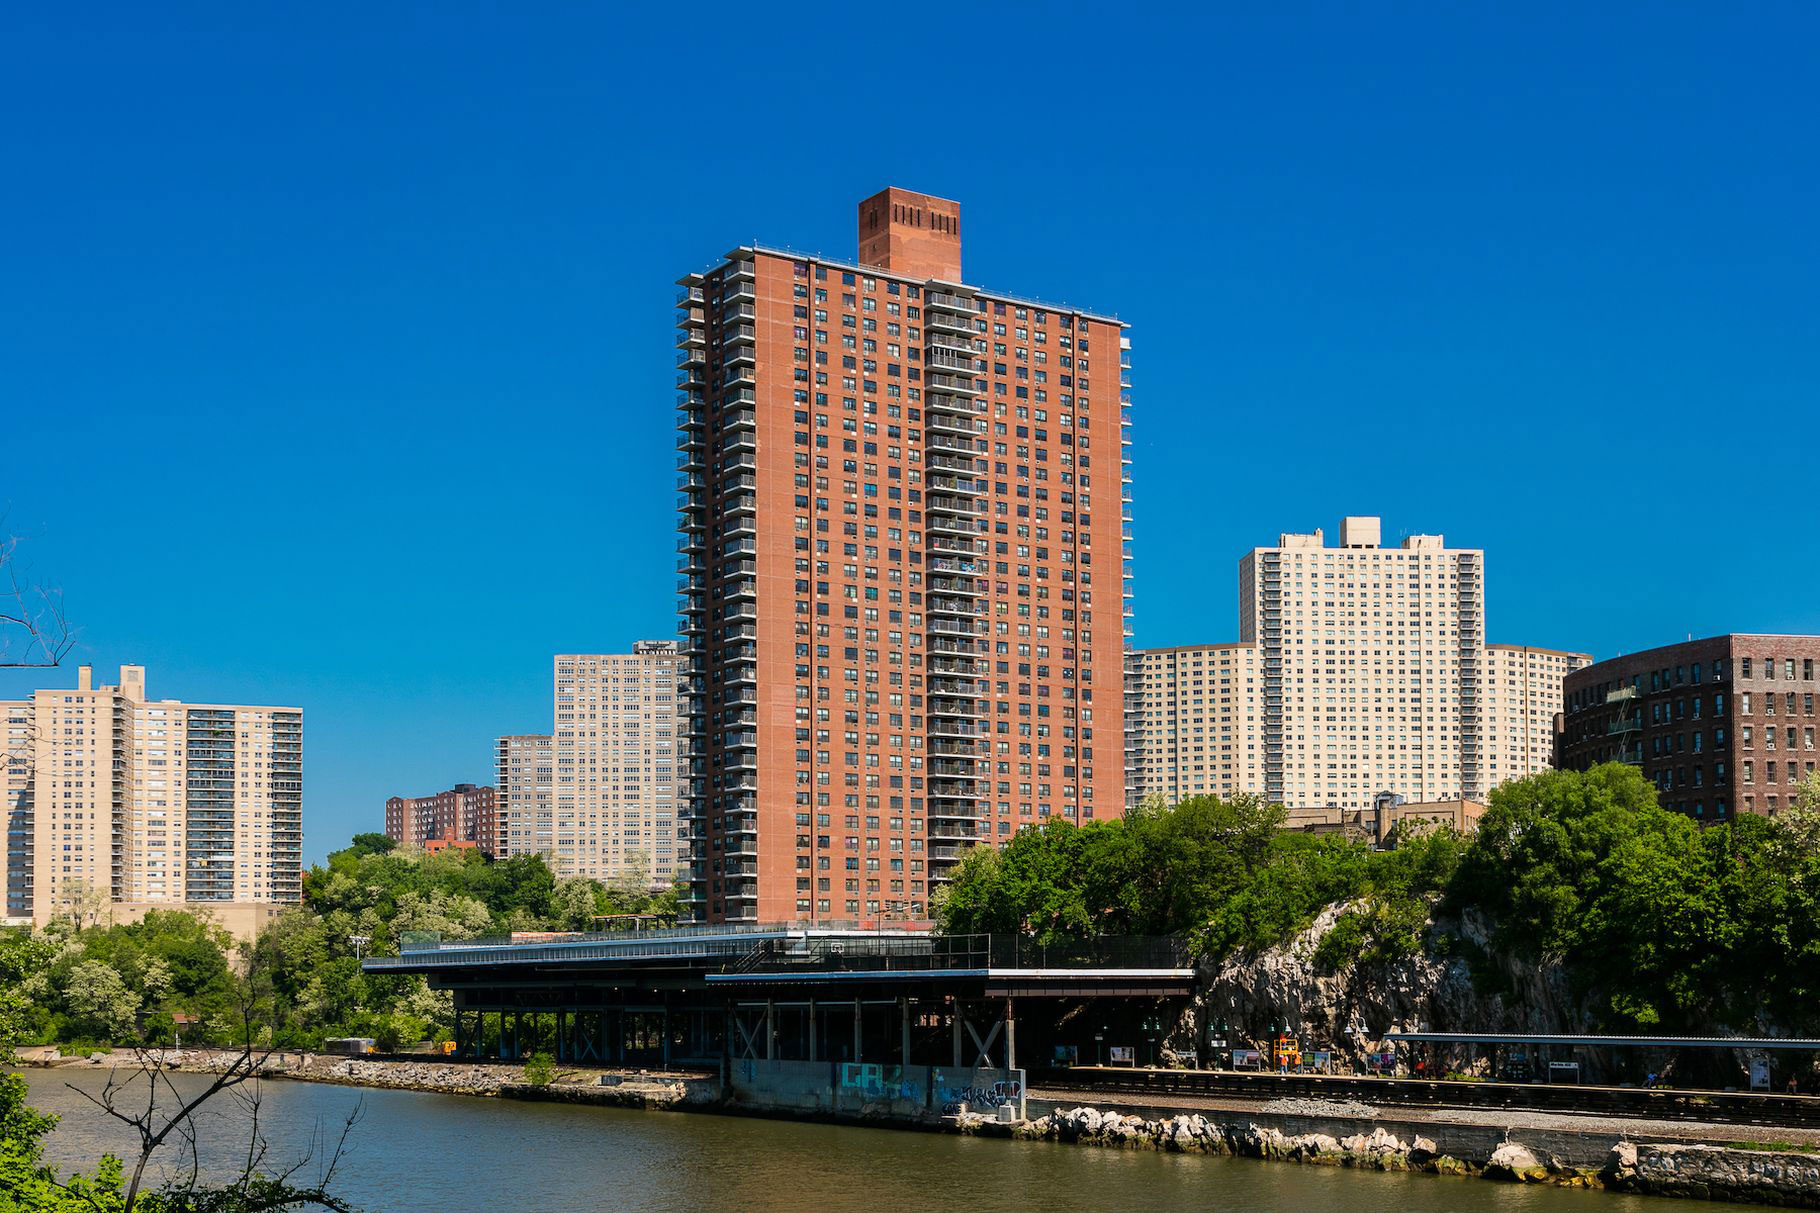 A photo of Promenade apartments building from across the river.